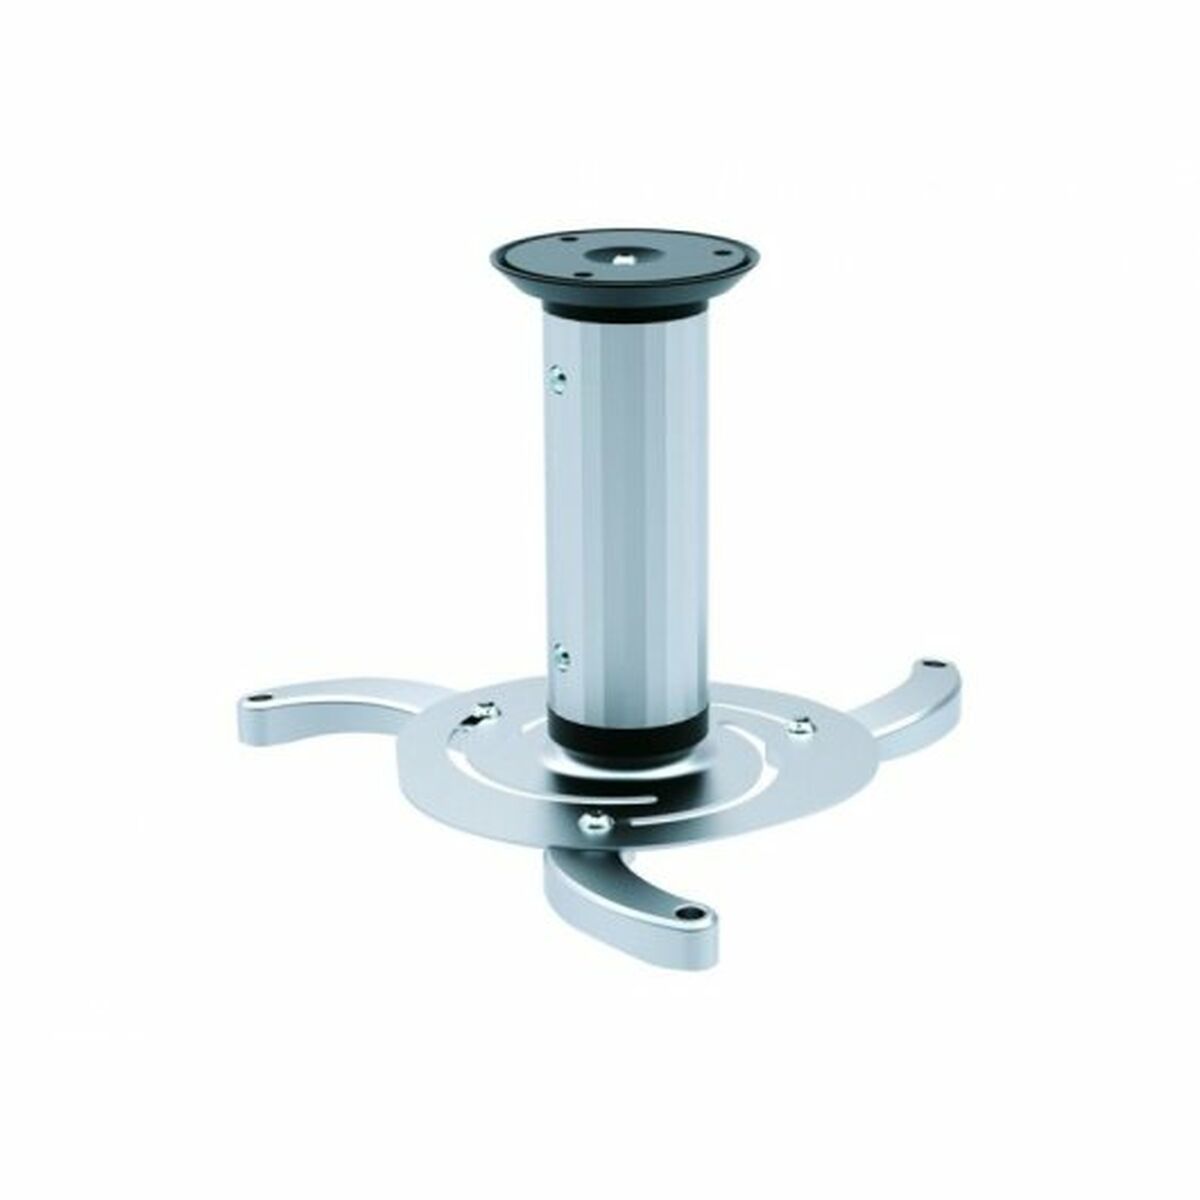 Tilt Ceiling Mount for Projectors Equip 650700, Equip, Electronics, TV, Video and home cinema, tilt-ceiling-mount-for-projectors-equip-650700, Brand_Equip, category-reference-2609, category-reference-2642, category-reference-2947, category-reference-t-18805, category-reference-t-19653, category-reference-t-19921, category-reference-t-21391, category-reference-t-25701, cinema and television, computers / peripherals, Condition_NEW, entertainment, office, Price_50 - 100, RiotNook